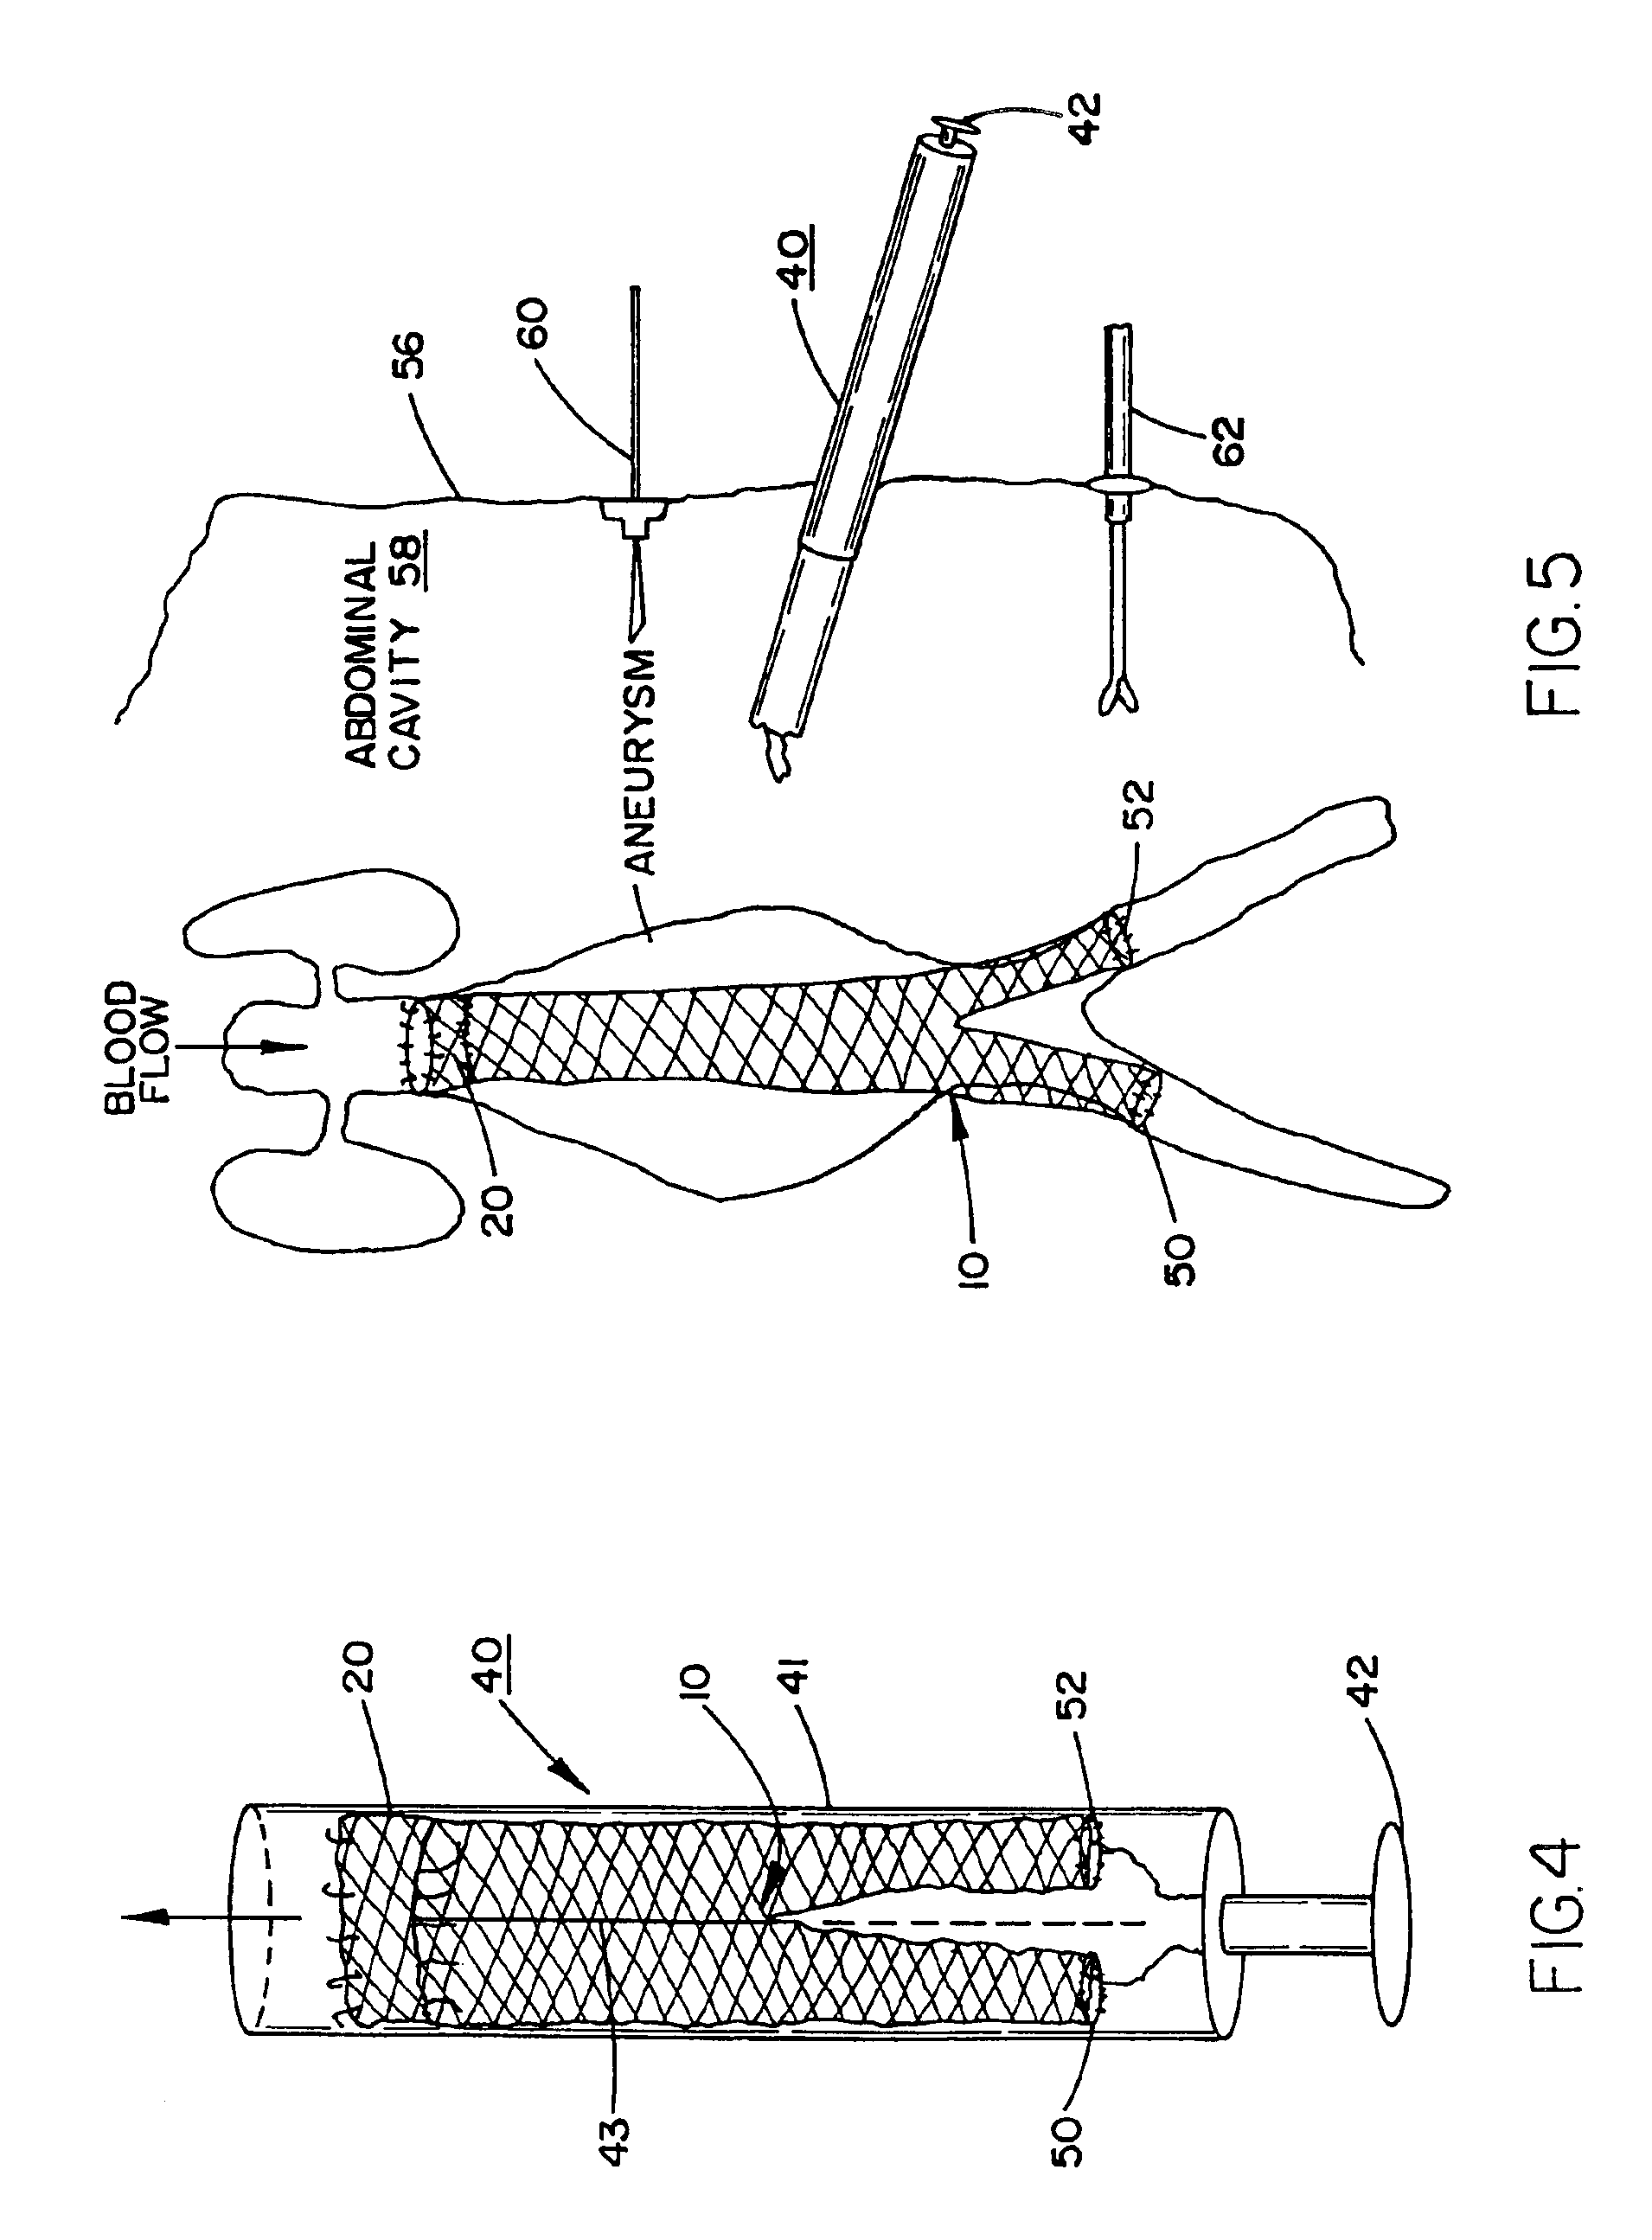 Prosthesis for the repair of thoracic or abdominal aortic aneurysms and method therefor